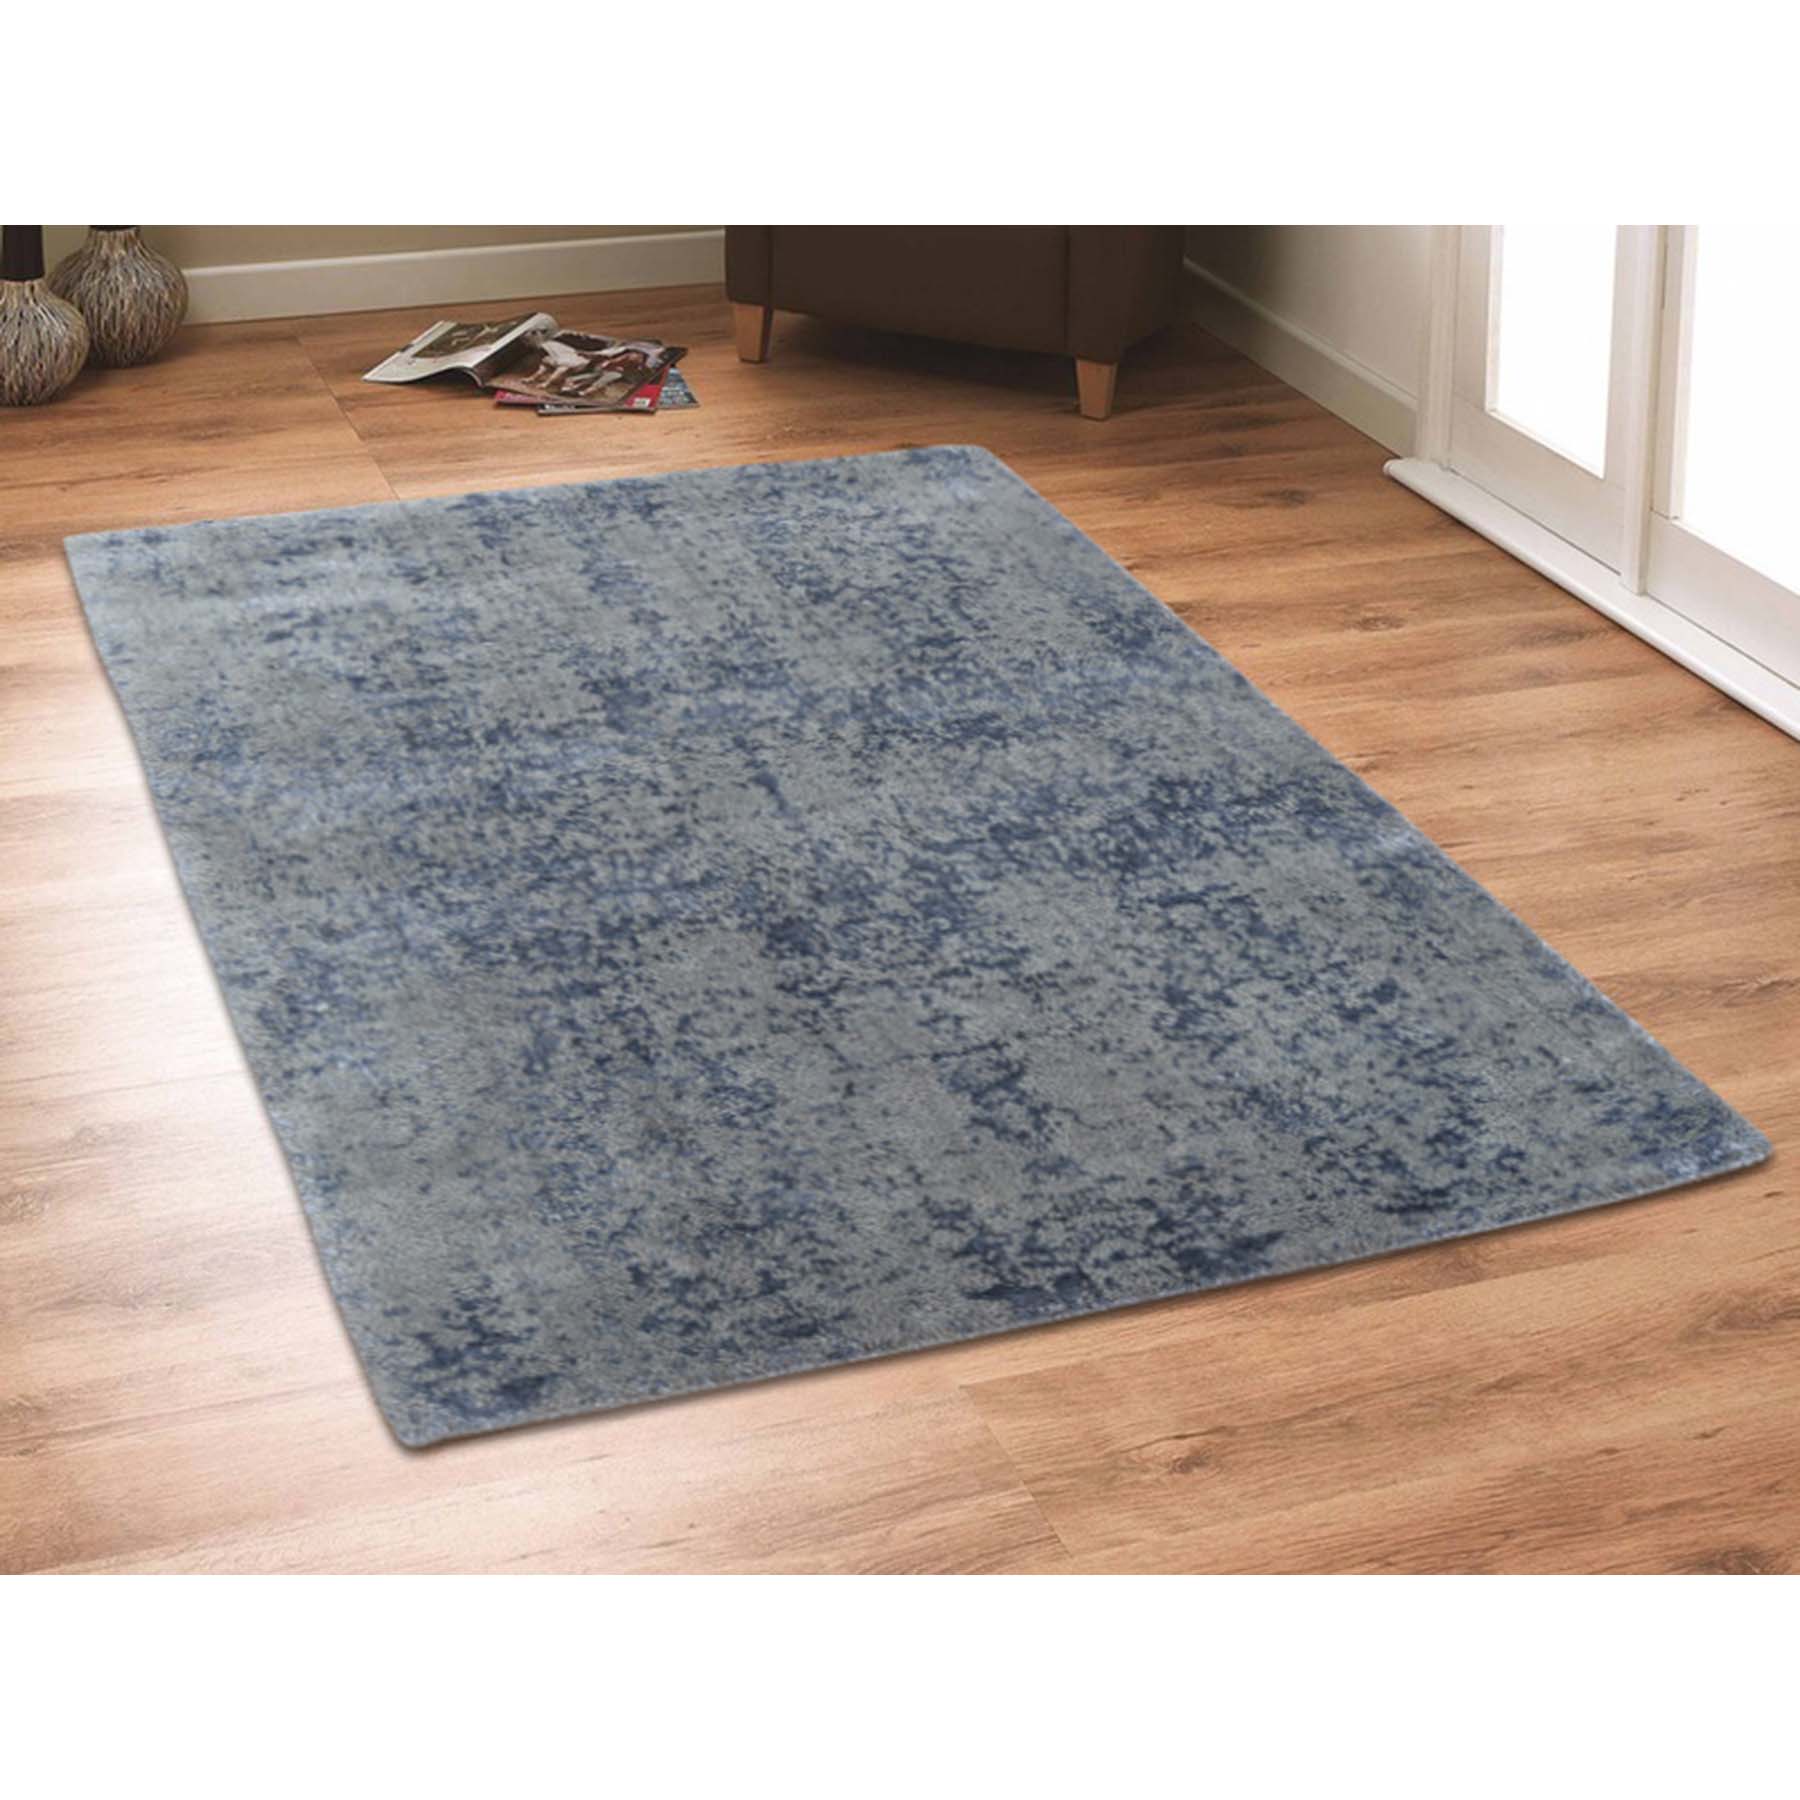 2-x3- Wool and Silk Hand-Loomed Abstract Design Tone on Tone Oriental Rug 